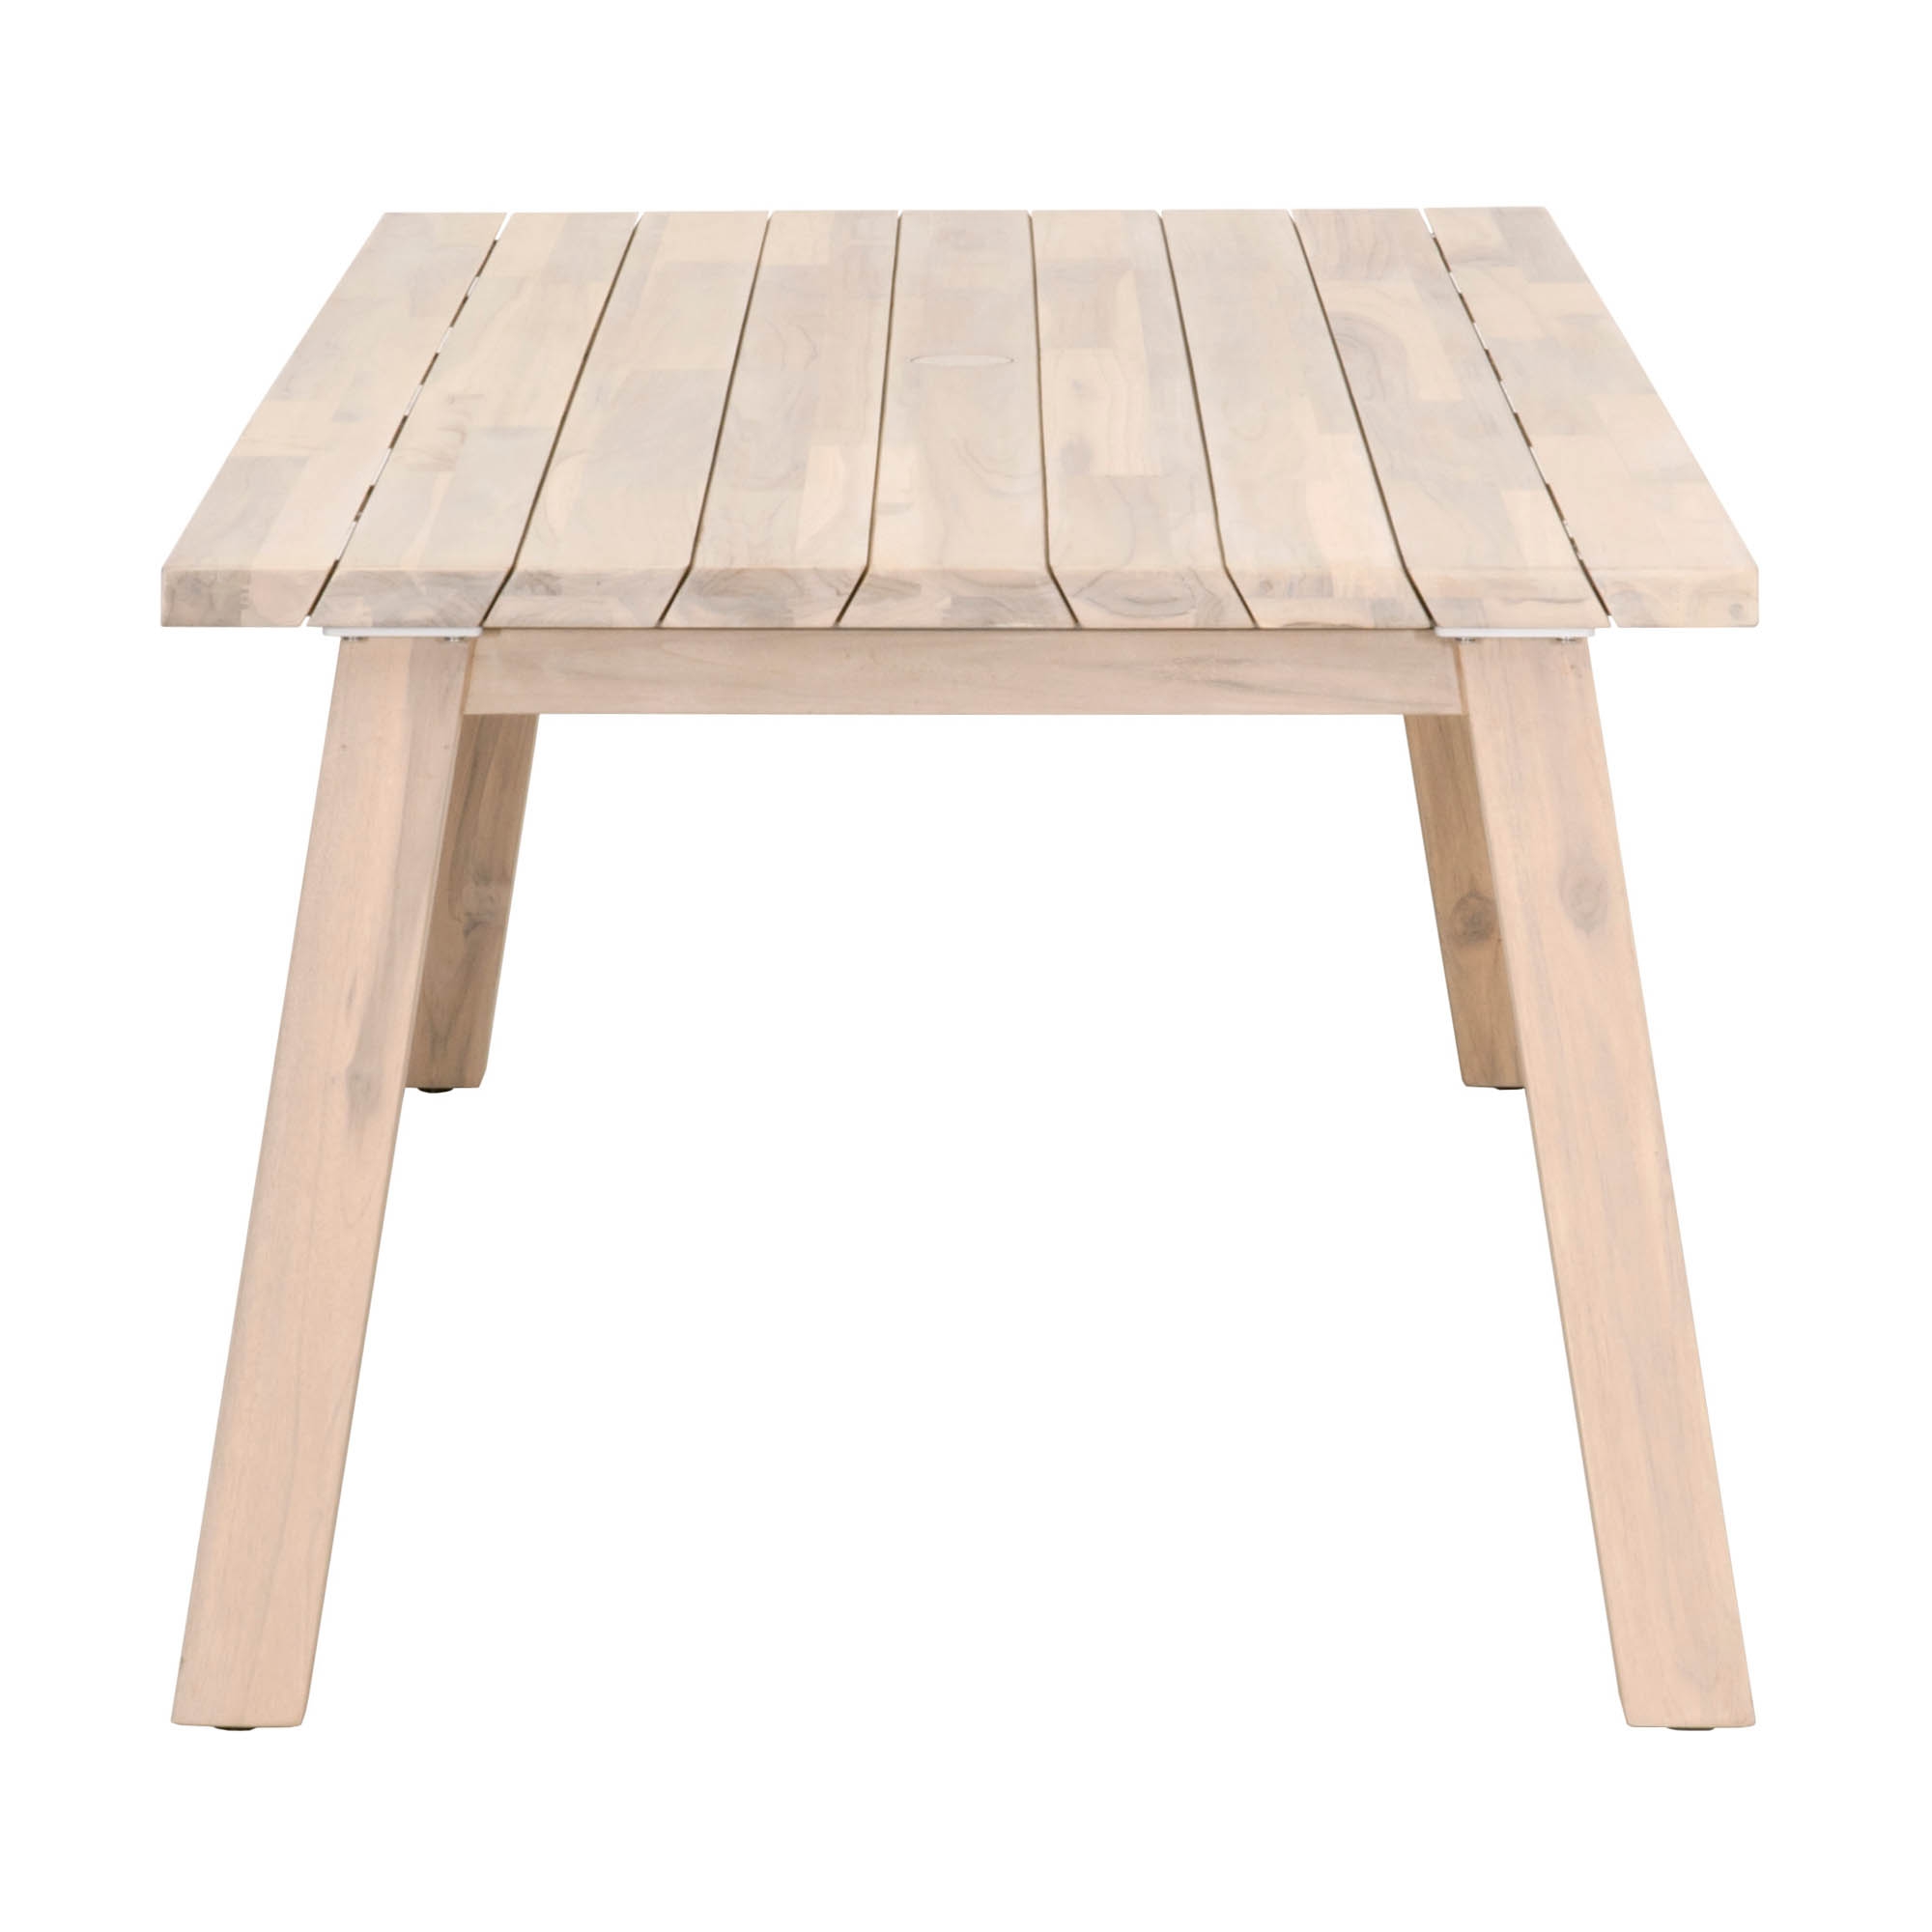 Diego Outdoor Dining Table Base - Image 3